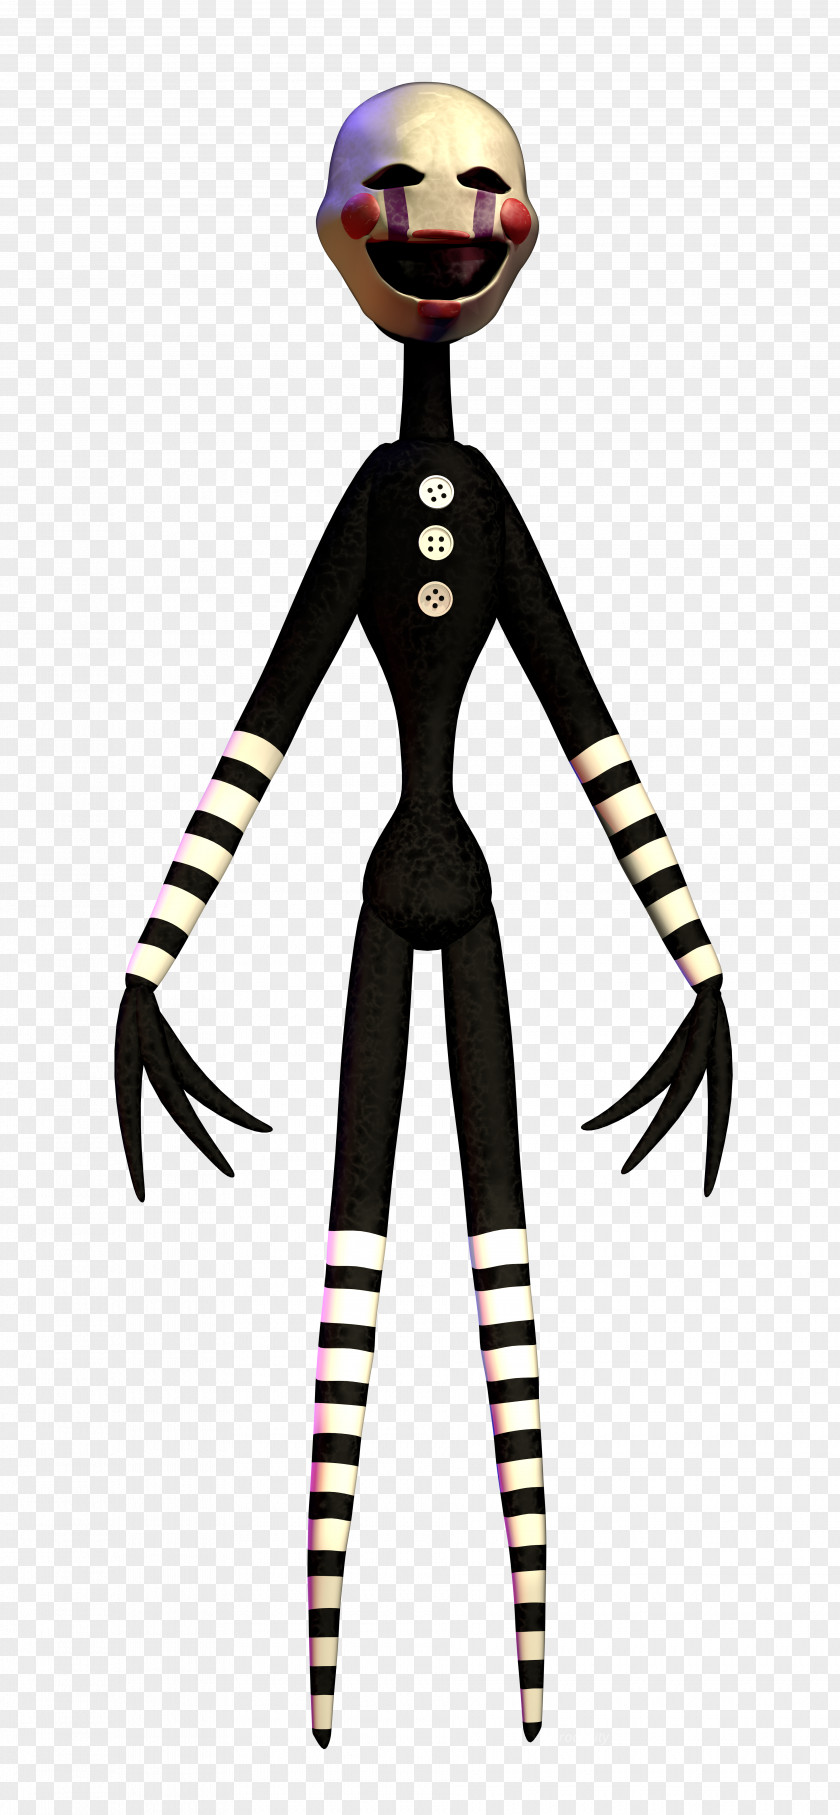 Jigsaw Puppet Five Nights At Freddy's 2 Freddy's: Sister Location 3 PNG